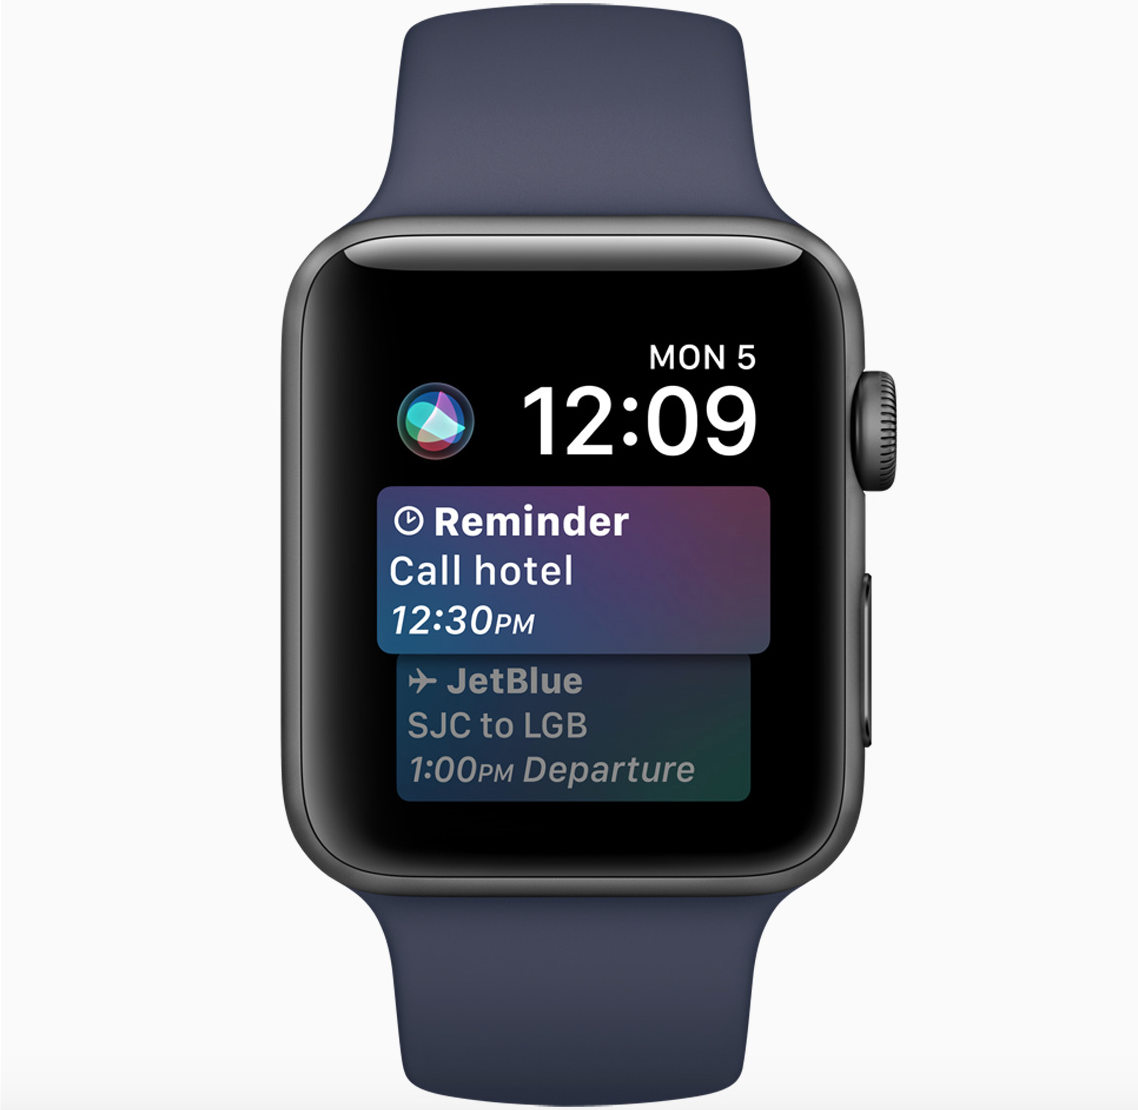 Siri Apple Watch Face in watchOS 4: First Impressions